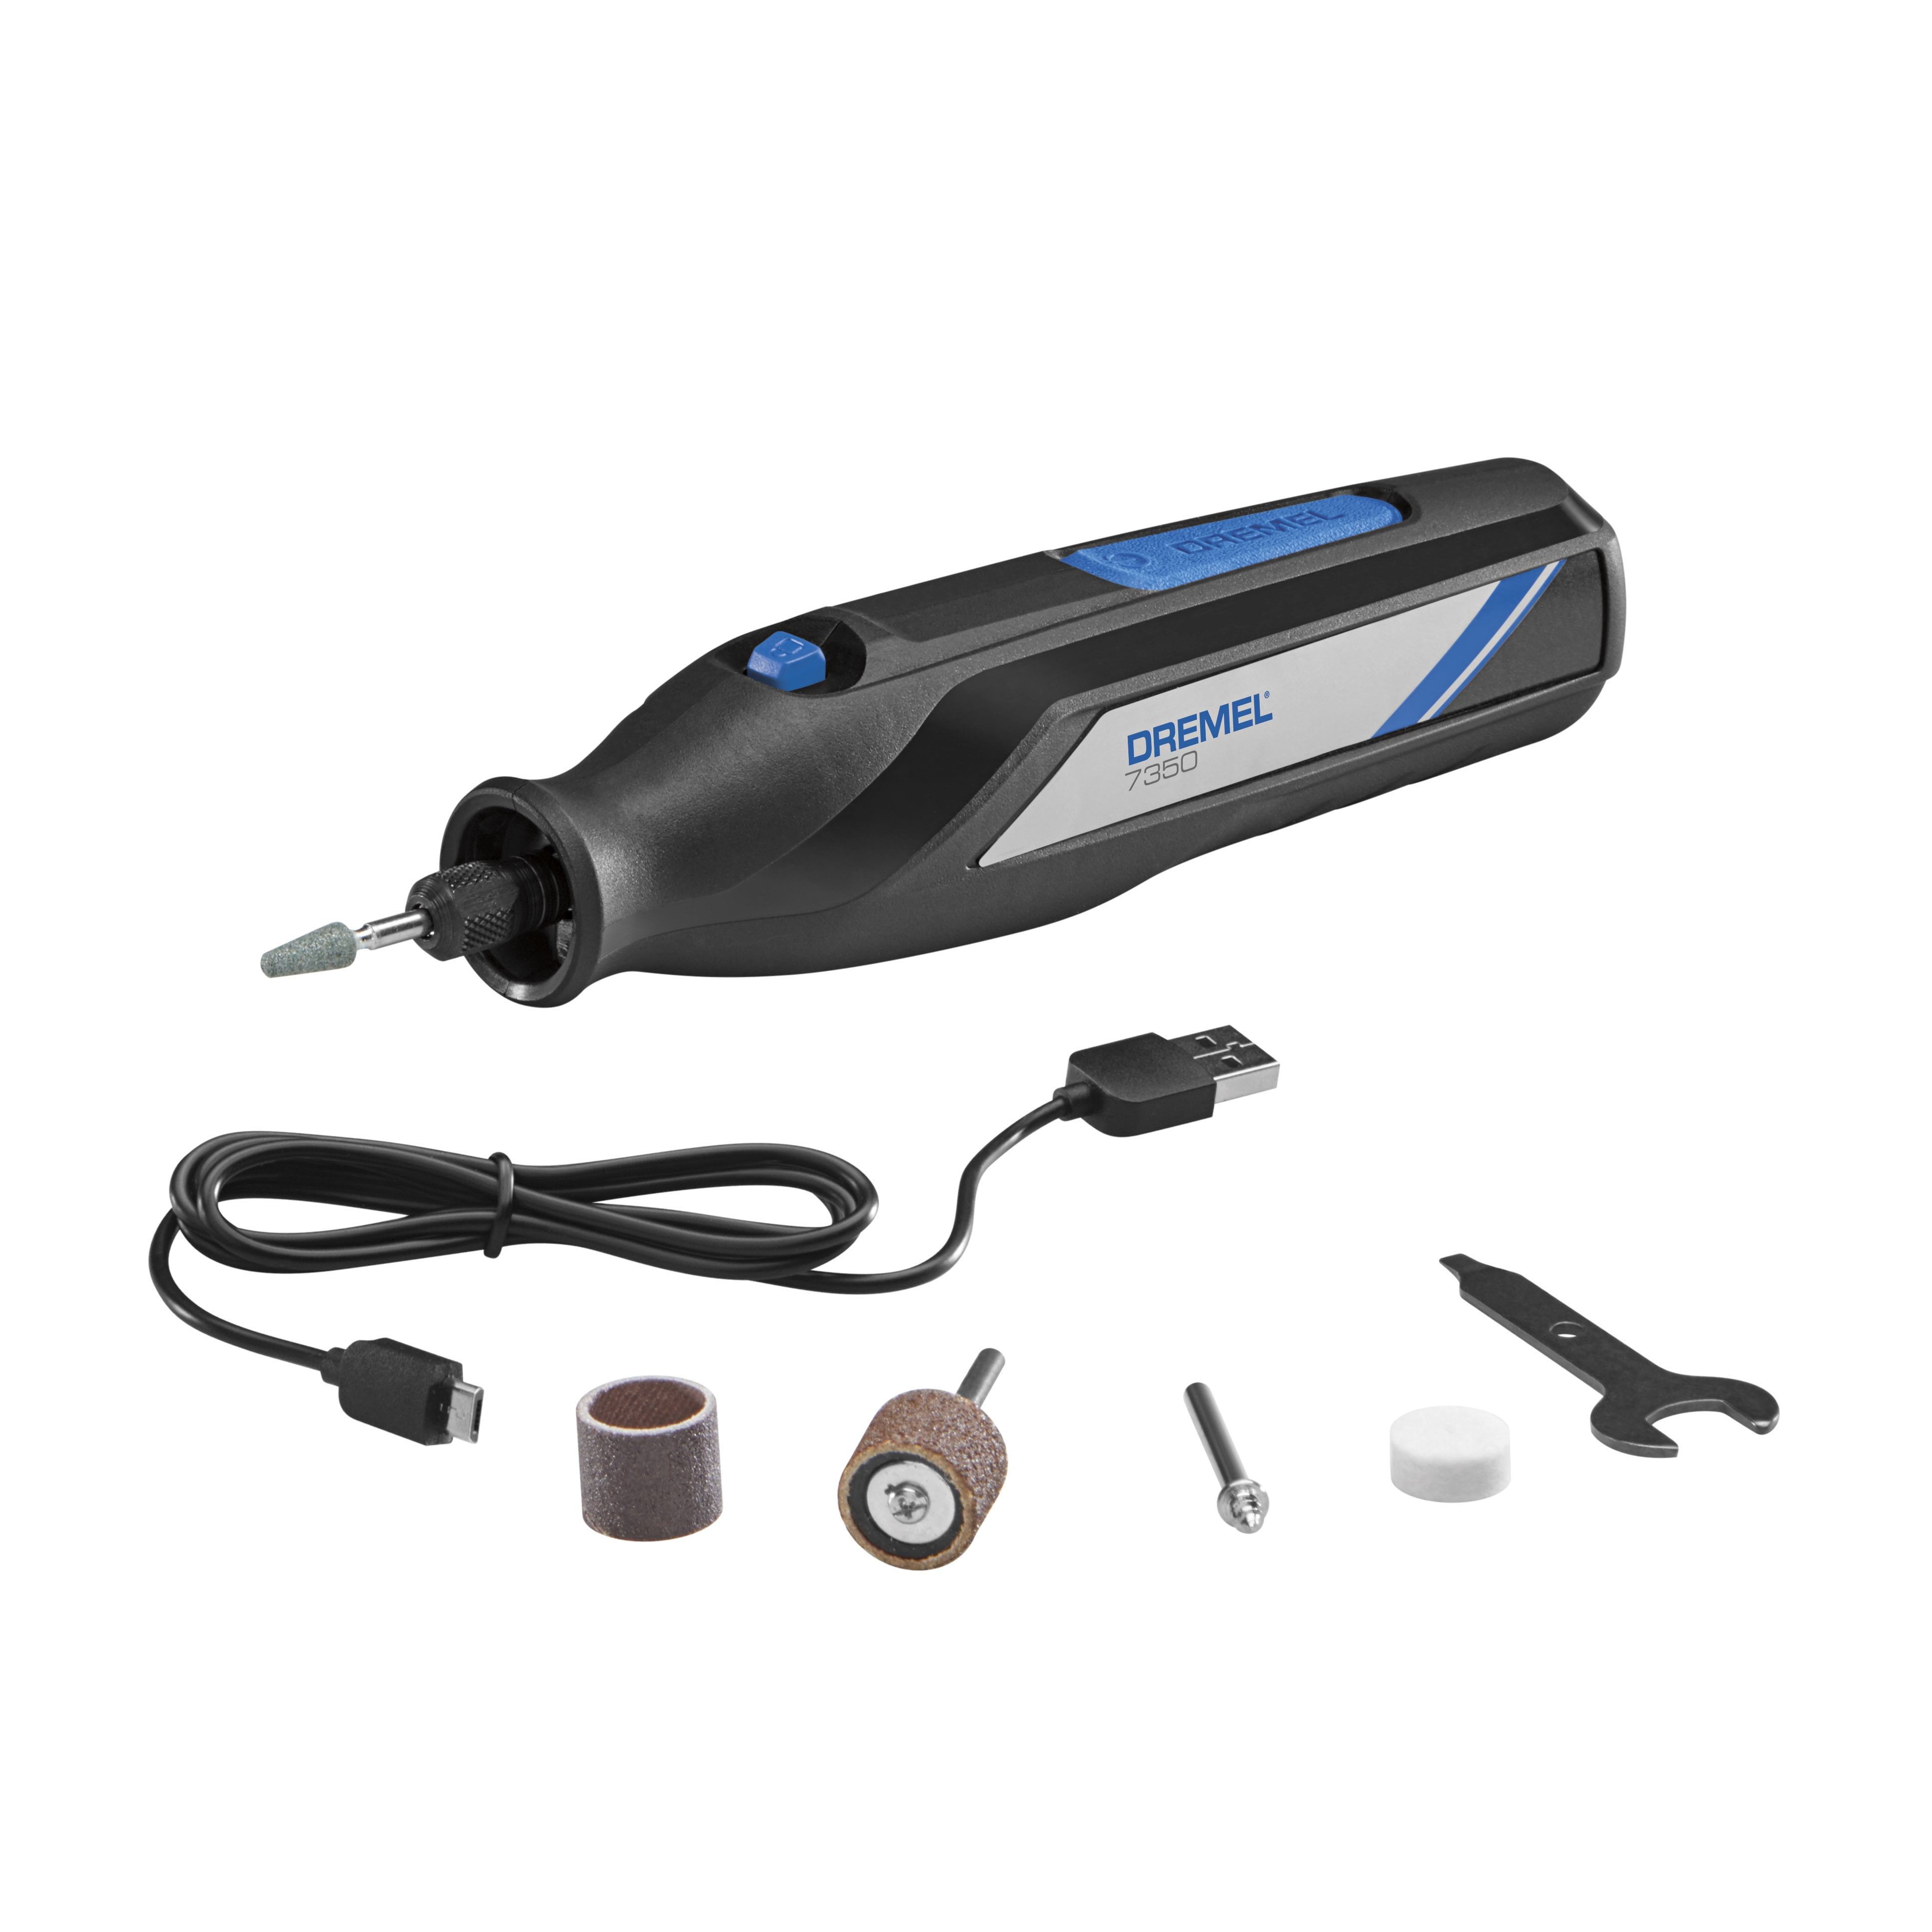 Dremel 7350-5 Cordless Rotary Tool Kit, Includes 4V Li-ion Battery and 7 Rotary Tool Accessories - Ideal for Light DIY Projects Work - Walmart.com